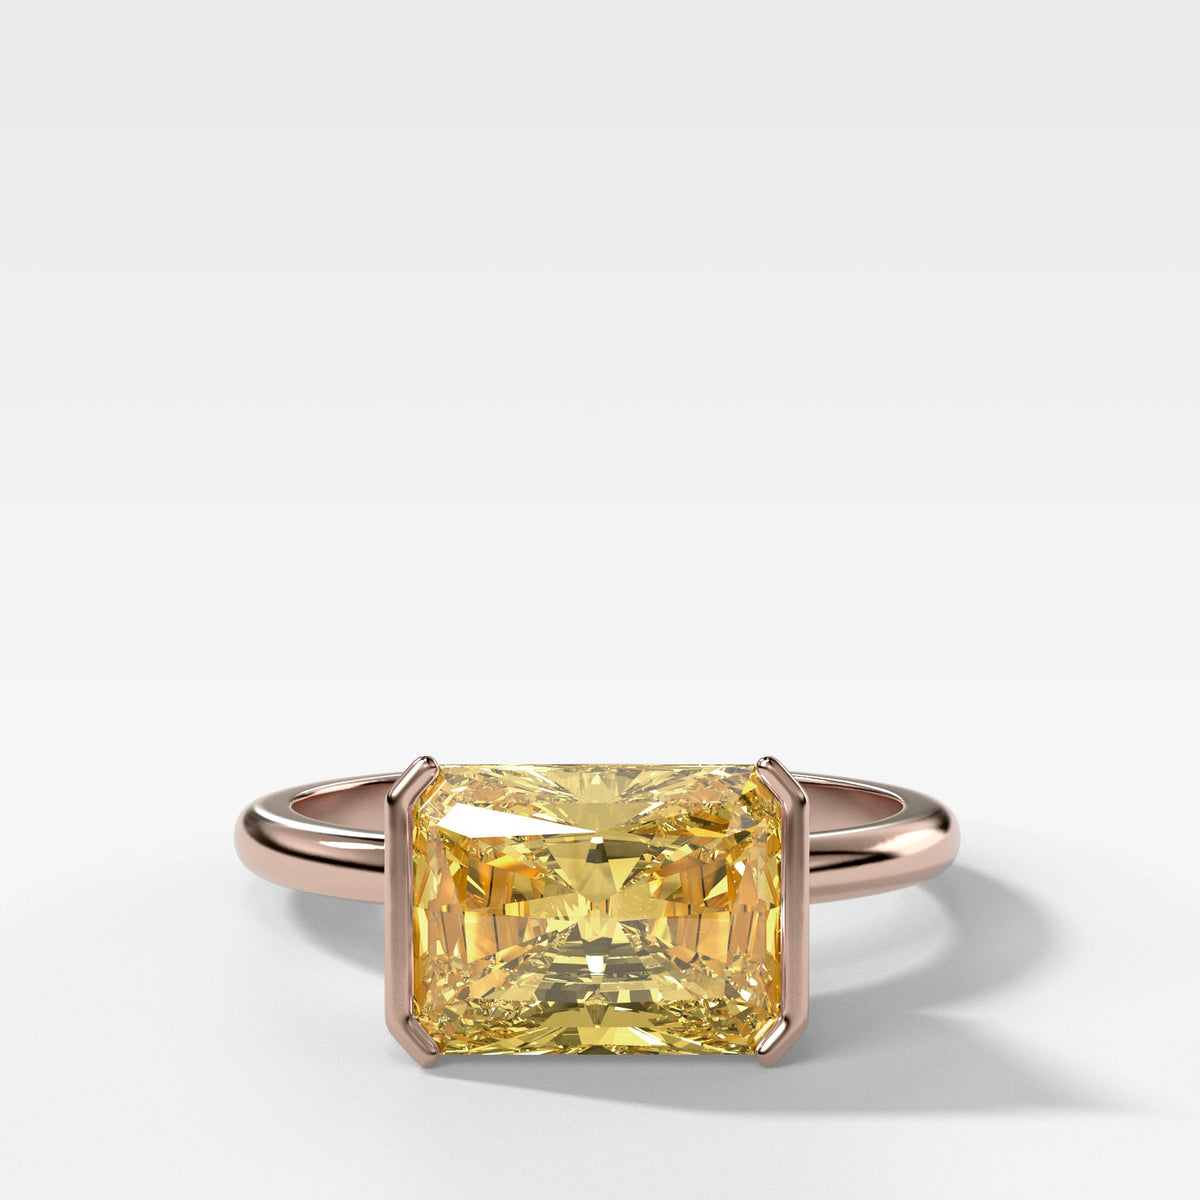 East West Half Bezel Solitaire Engagement Ring With Canary Yellow Elongated Radiant Cut Diamond